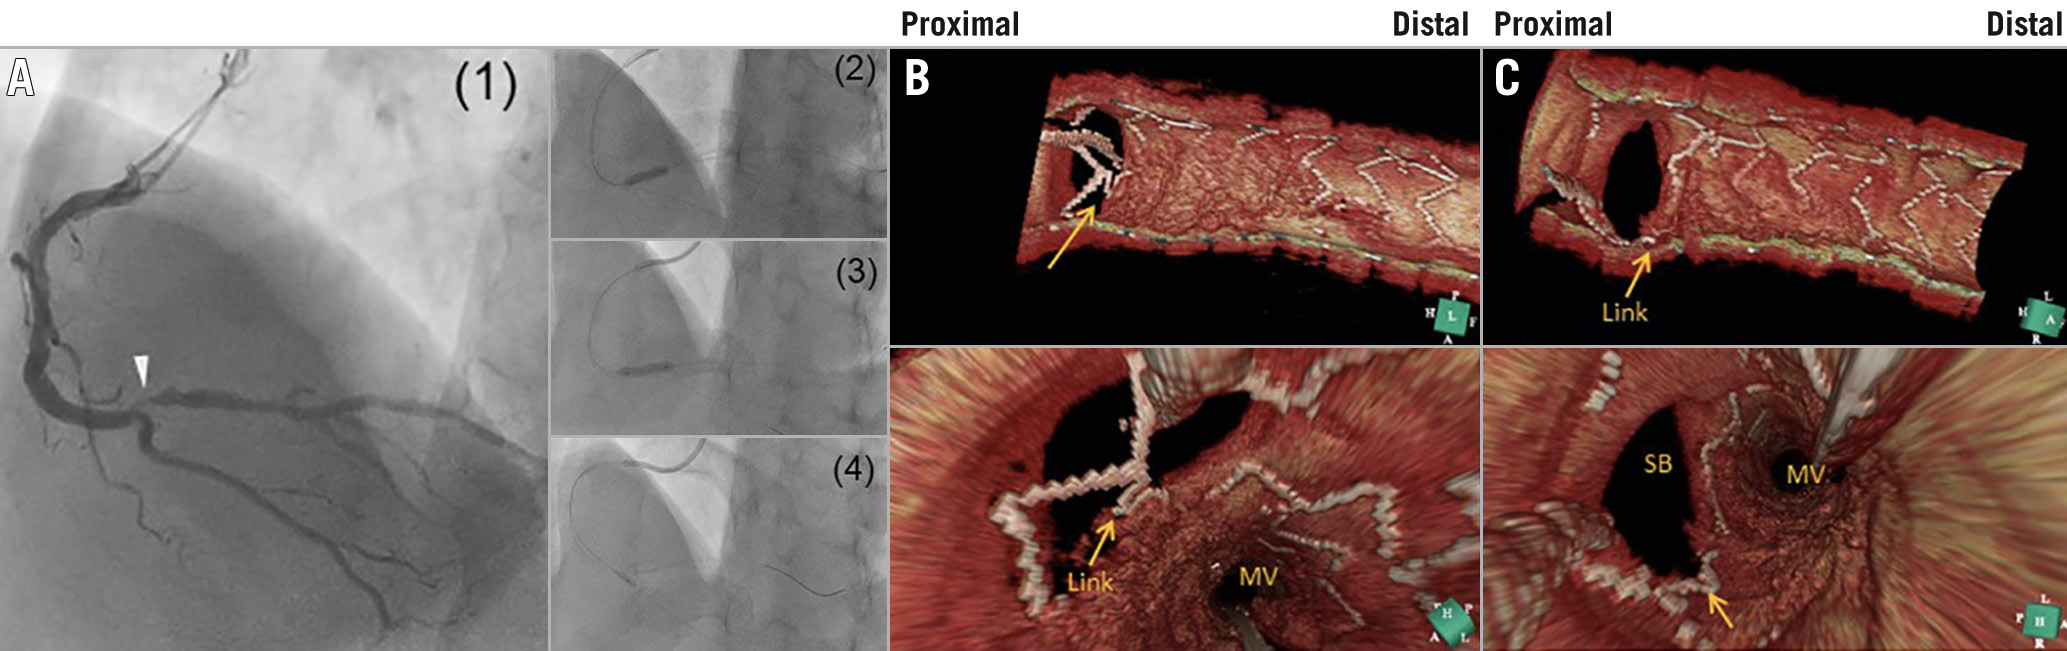 Figure 3. A representative effective case of GB dilation after crossover stenting. A) Coronary intervention. (1) Baseline coronary angiography showed a 0,1,0 bifurcation lesion with right bifurcation angle in the distal RCA. (2) A 3.25/15 mm XIENCE Xpedition® stent (Abbott Vascular) was deployed at 12 atm. (3) The stent delivery balloon was inflated at 16 atm again after some retrieval of the balloon proximally to appose the stent completely. (4) A 2.5/4 mm GB was inflated at the SB ostium. B) Three-dimensional OCT images after guidewire recrossing the SB (upper, cut-plane view; lower, fly-through view). The guidewire was recrossed in the distal cell; however, a link connection was located at the centre of the carinal site (arrows). C) Three-dimensional OCT images after the GB dilation. The jailed strut and link connection were clearly removed from the SB ostium (arrows).